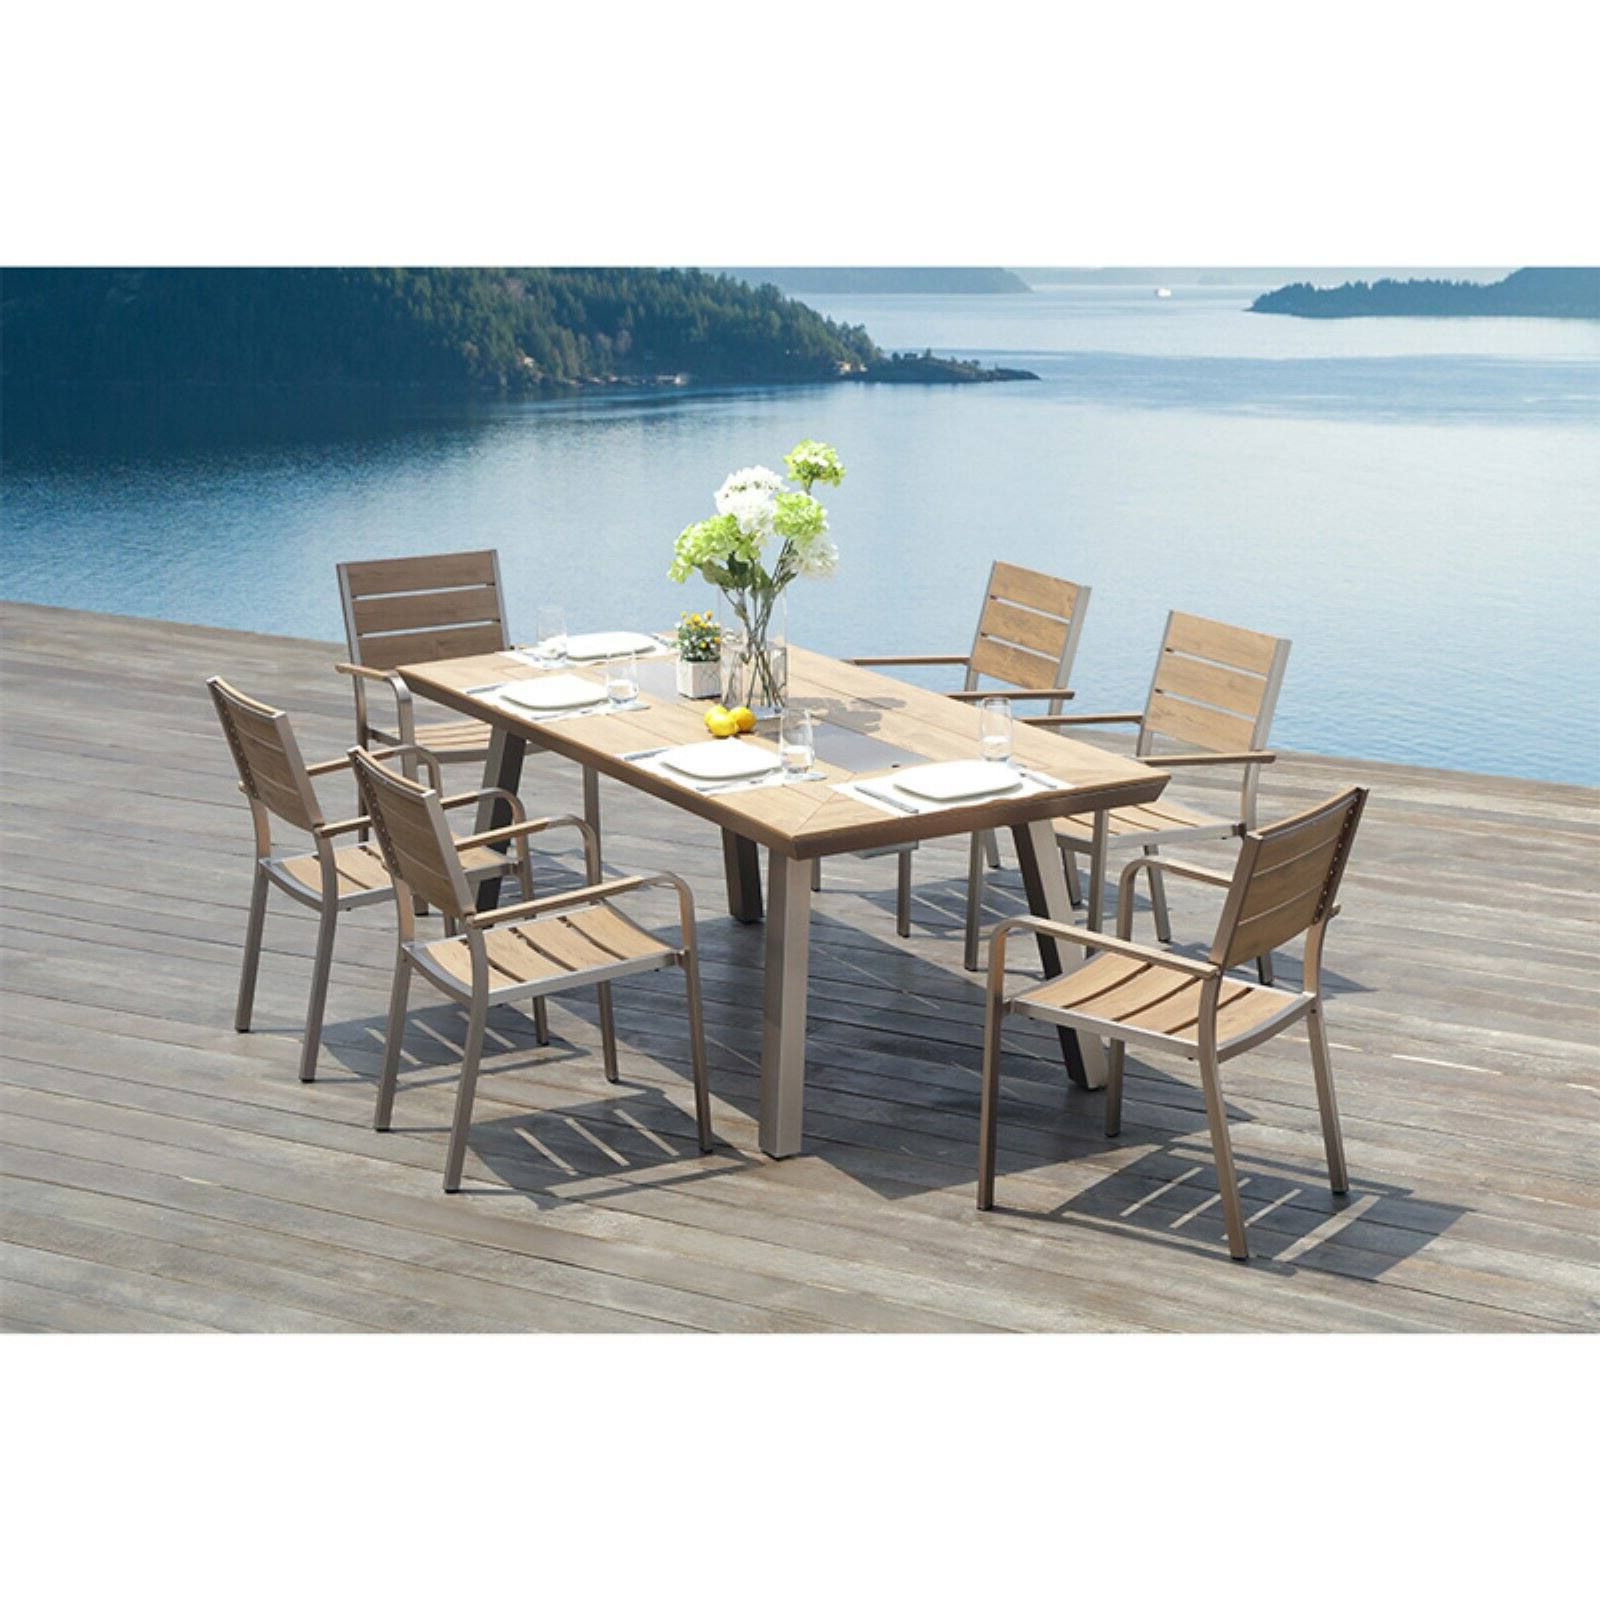 Ove Decors Pompano 7 Piece Wood Patio Dining Set – Walmart Pertaining To Famous 7 Piece Patio Dining Sets (View 11 of 15)